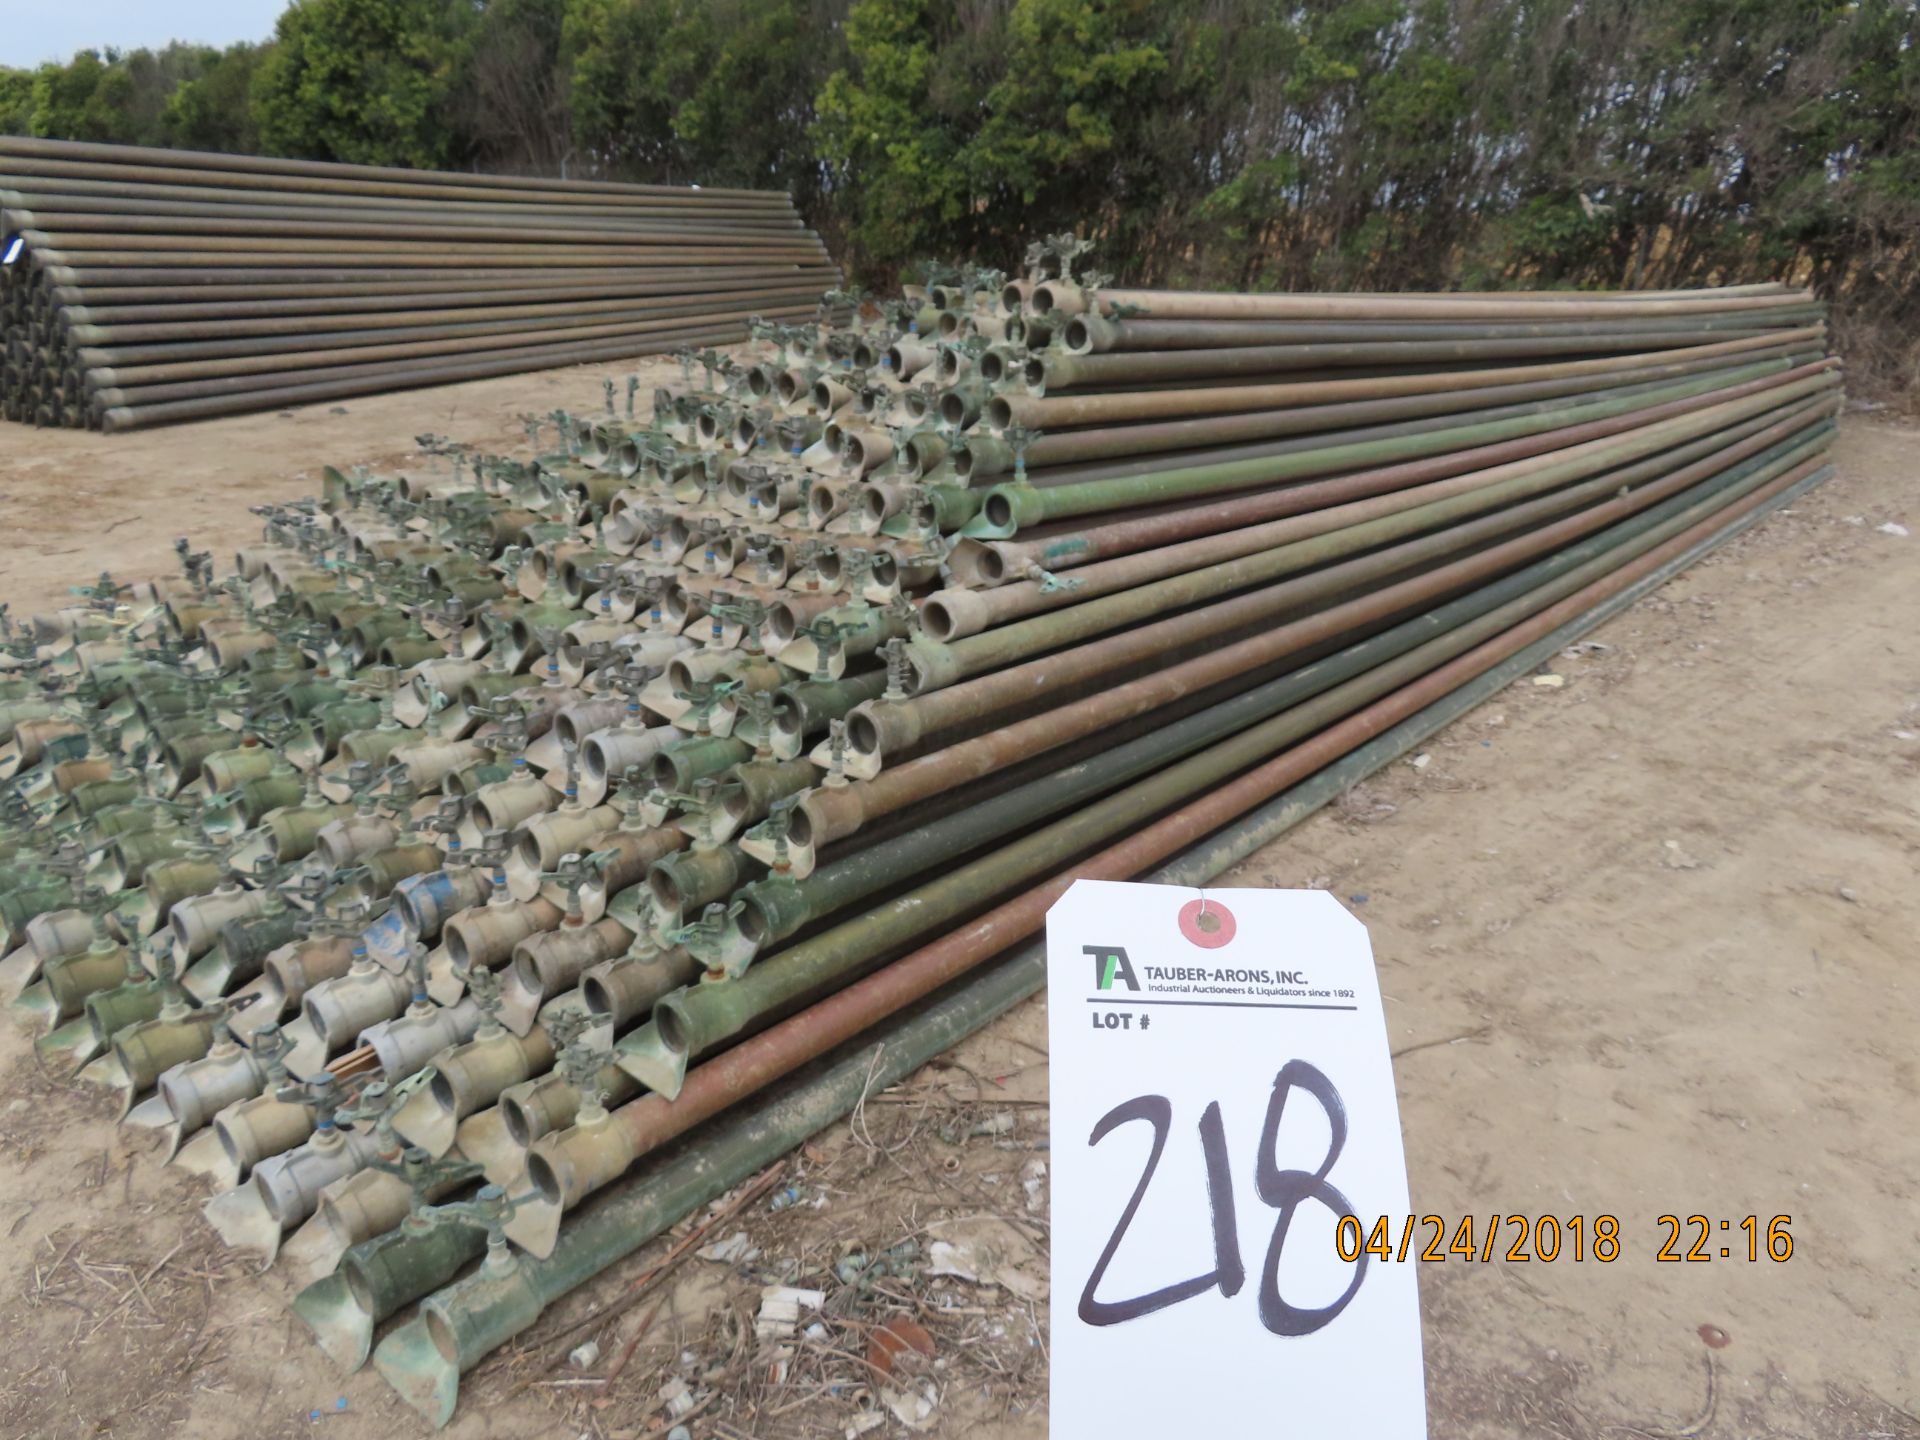 3'' x 30'L Irrigation Pipe w/ Sprinkler Heads Aluminum - Image 2 of 2